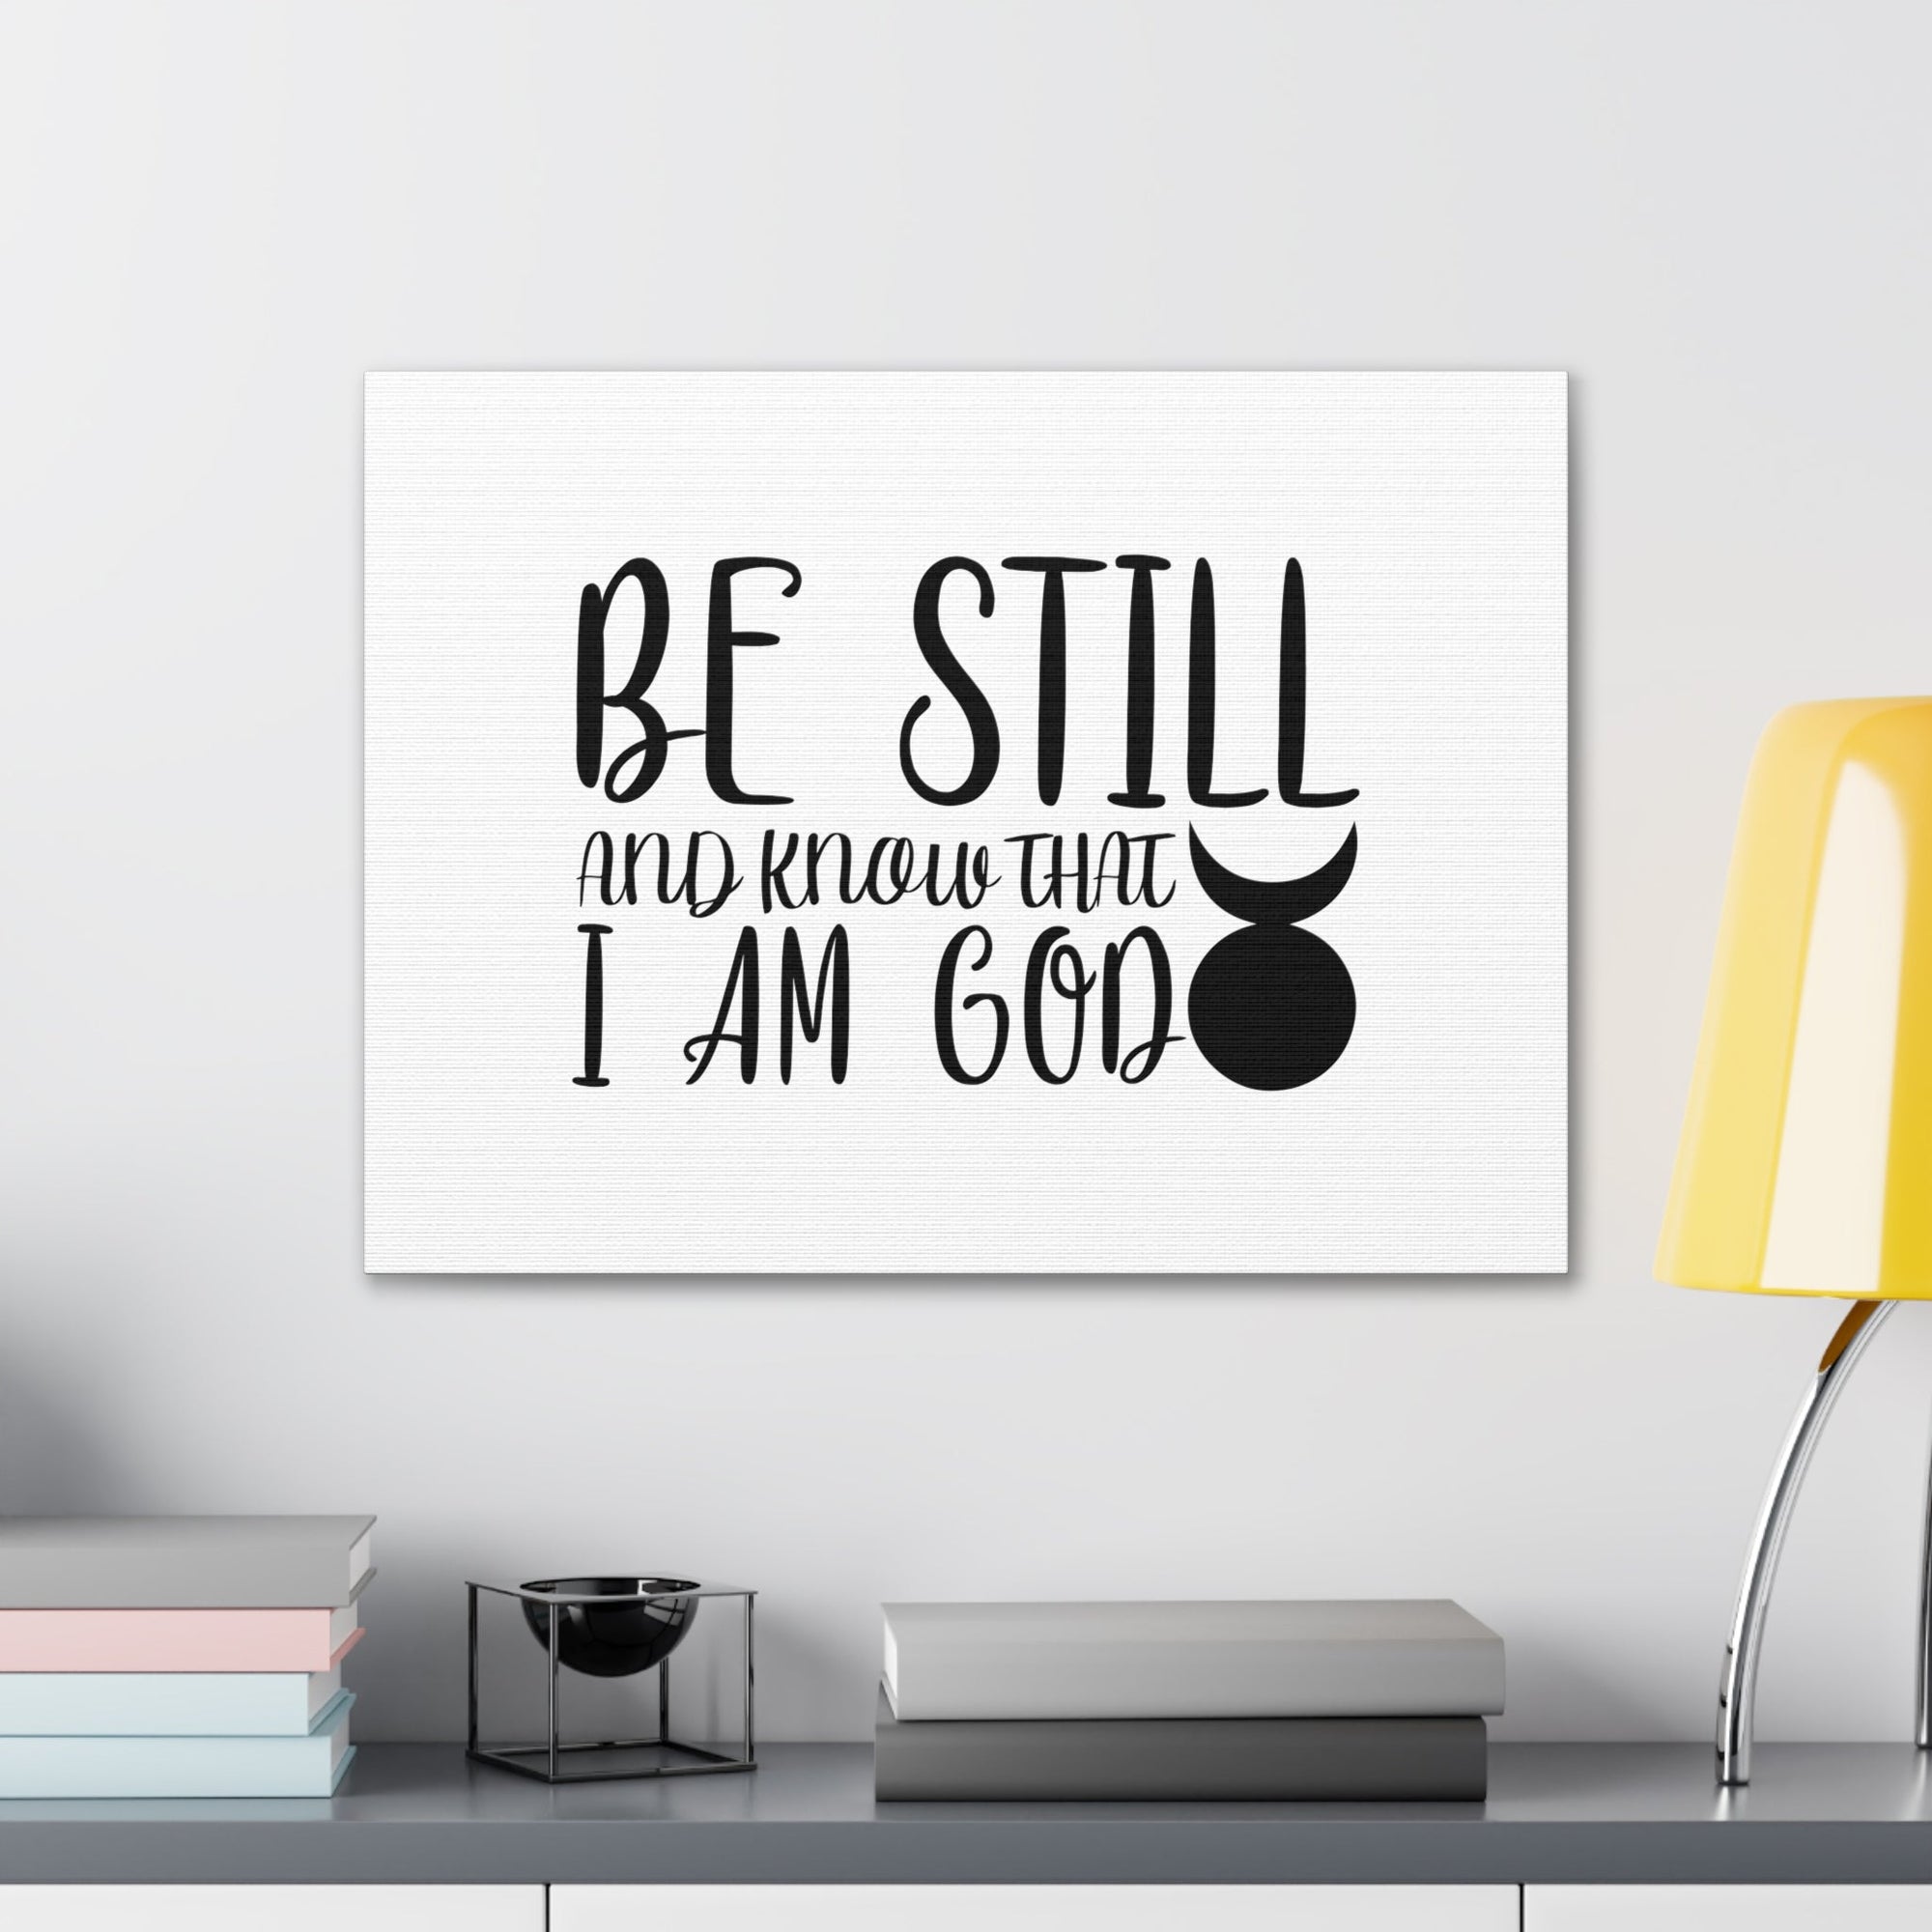 Scripture Walls Know That I Am God Genesis 35:11 Christian Wall Art Bible Verse Print Ready to Hang Unframed-Express Your Love Gifts